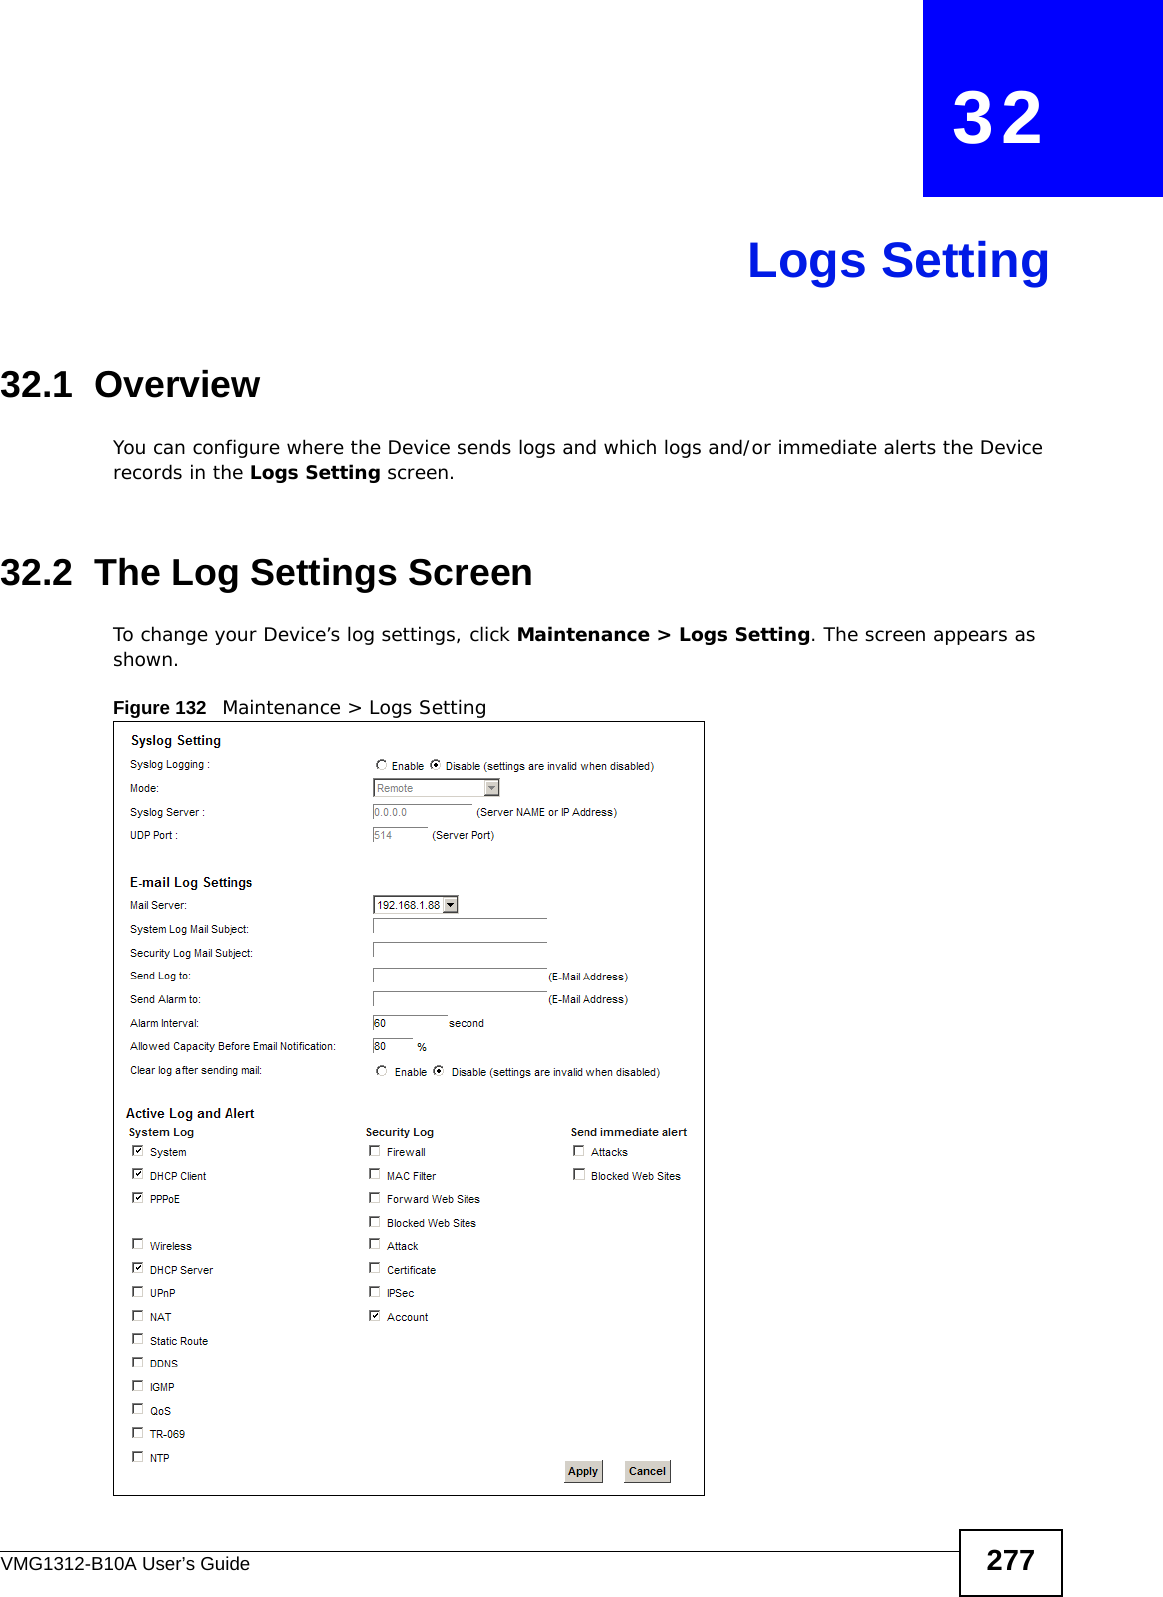 VMG1312-B10A User’s Guide 277CHAPTER   32Logs Setting32.1  Overview You can configure where the Device sends logs and which logs and/or immediate alerts the Device records in the Logs Setting screen.32.2  The Log Settings ScreenTo change your Device’s log settings, click Maintenance &gt; Logs Setting. The screen appears as shown.Figure 132   Maintenance &gt; Logs Setting